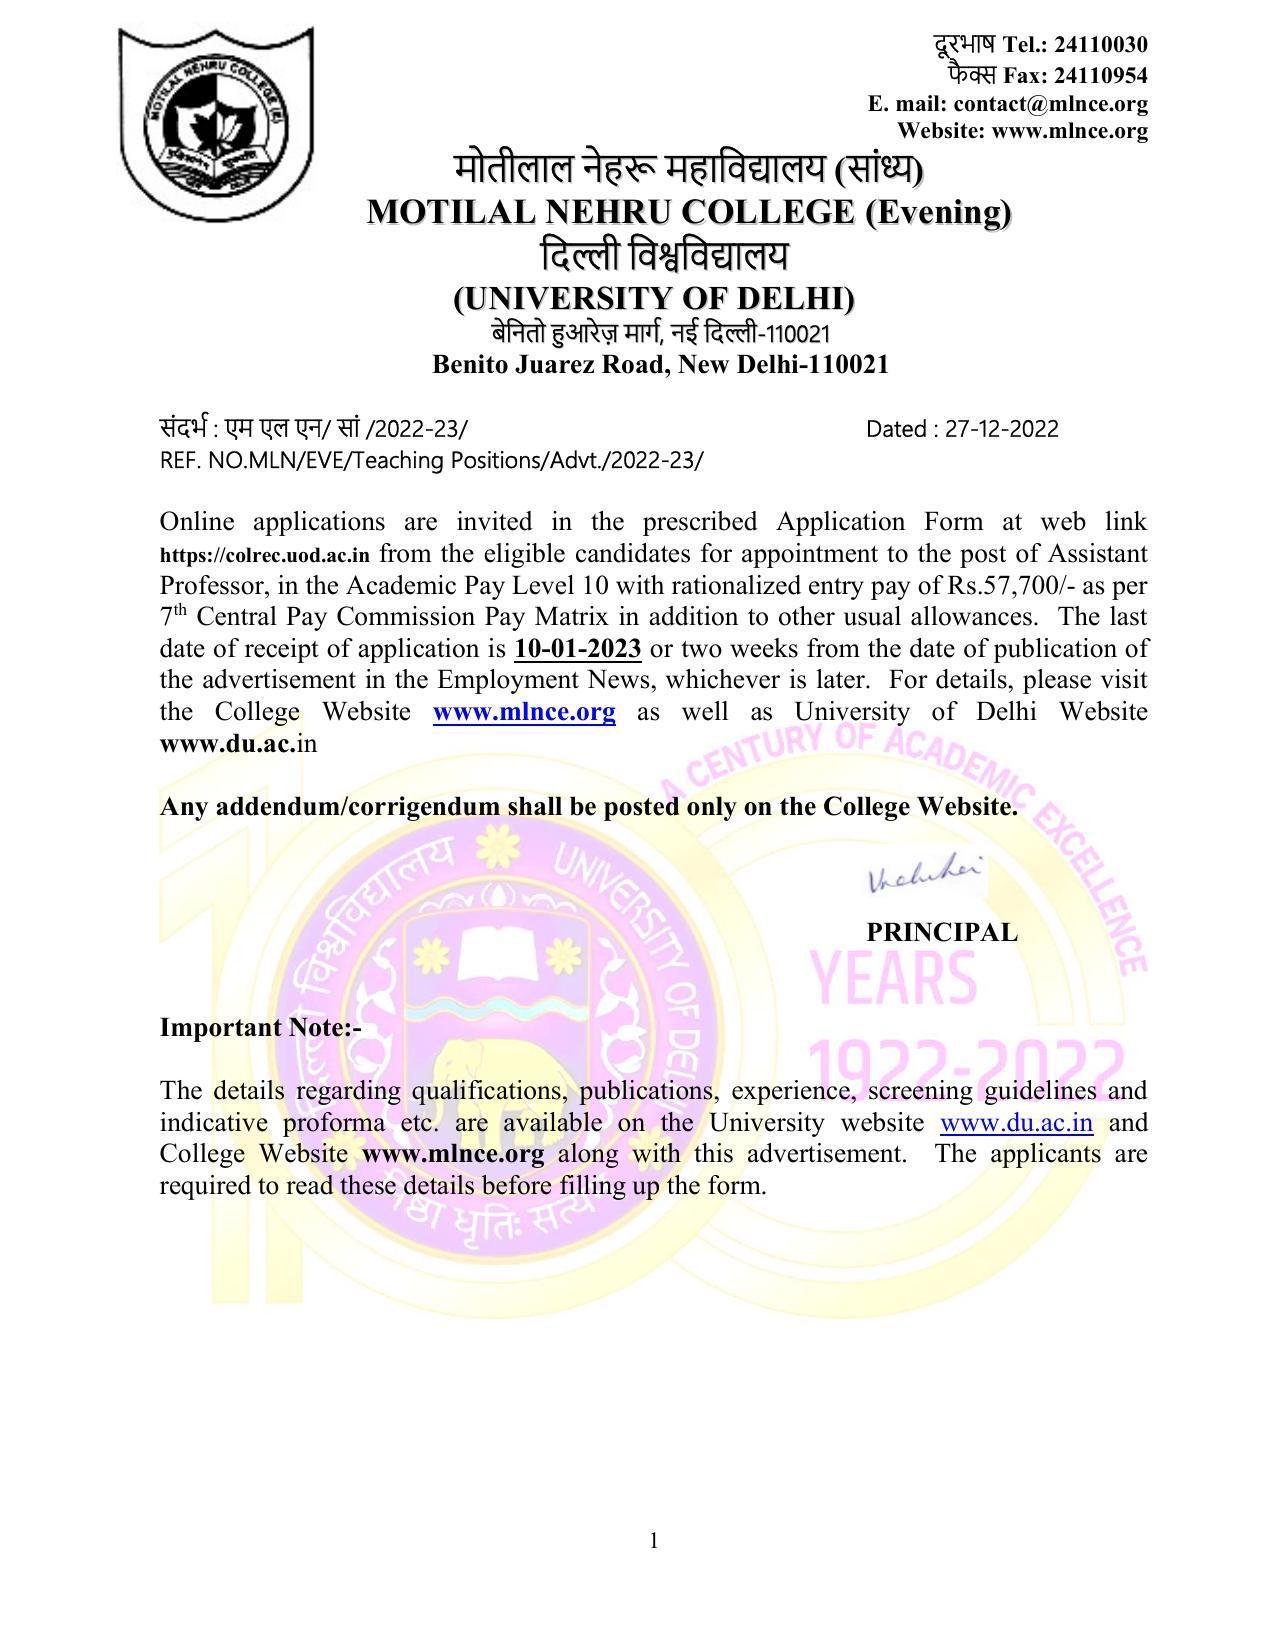 Motilal Nehru College (Evening) Invites Application for 75 Assistant Professor Recruitment 2022 - Page 1